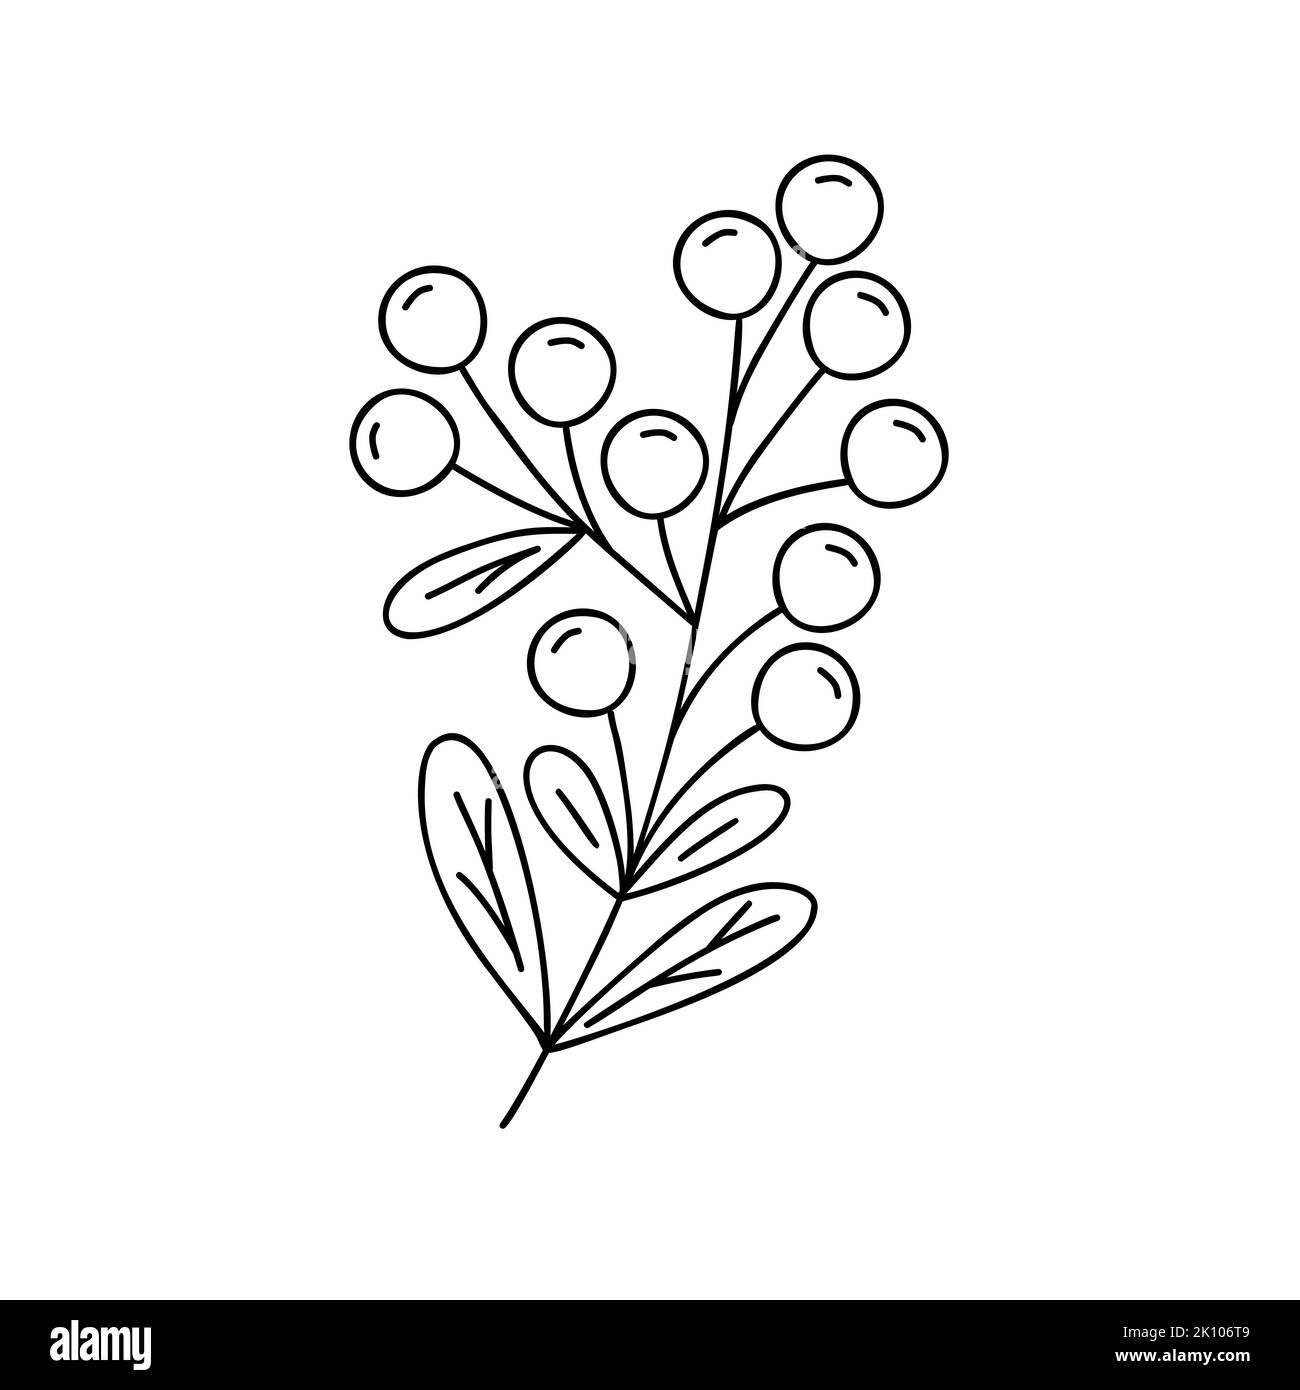 Outline plant decorative branch with leaves and berries for home decor, Christmas, New Year festive holiday arrangement, vector illustration for seasonal greeting card, invitation, banner Stock Vector